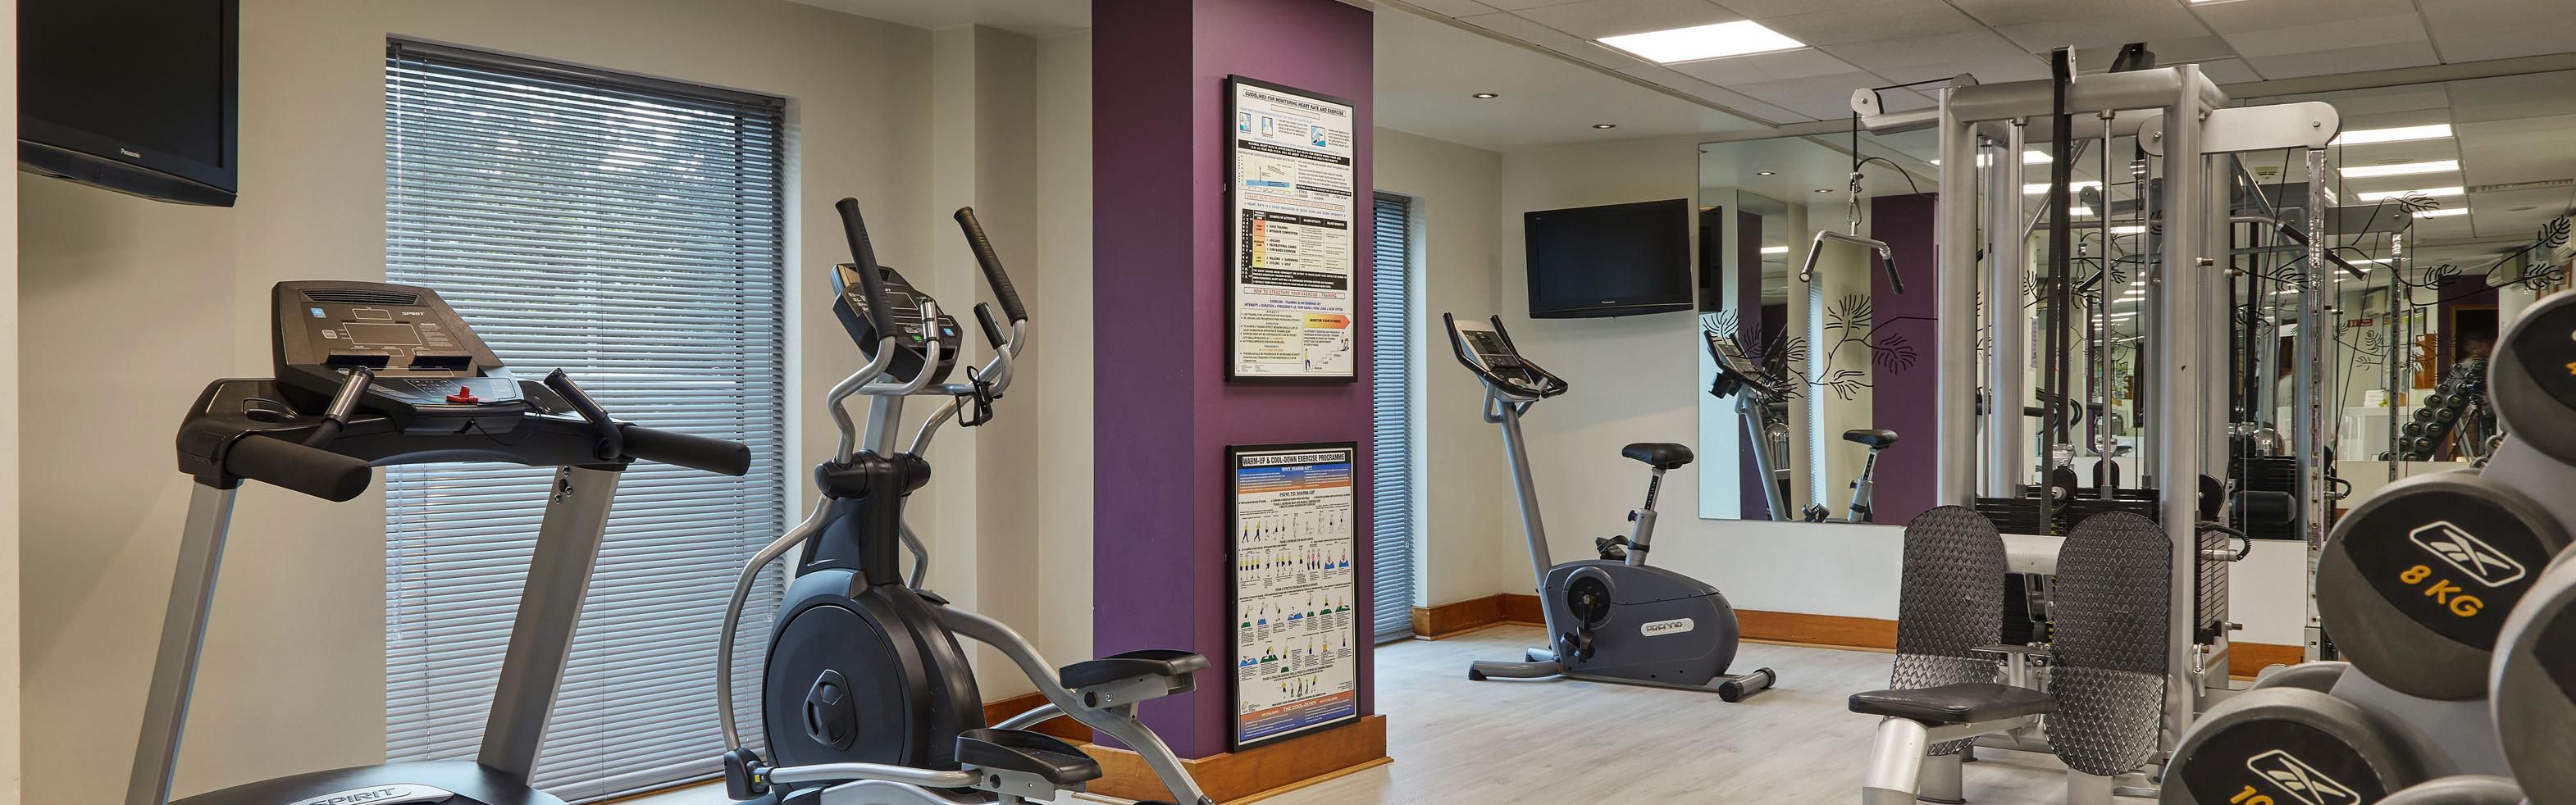 Continue your workout regimen in our 24 hour fitness center